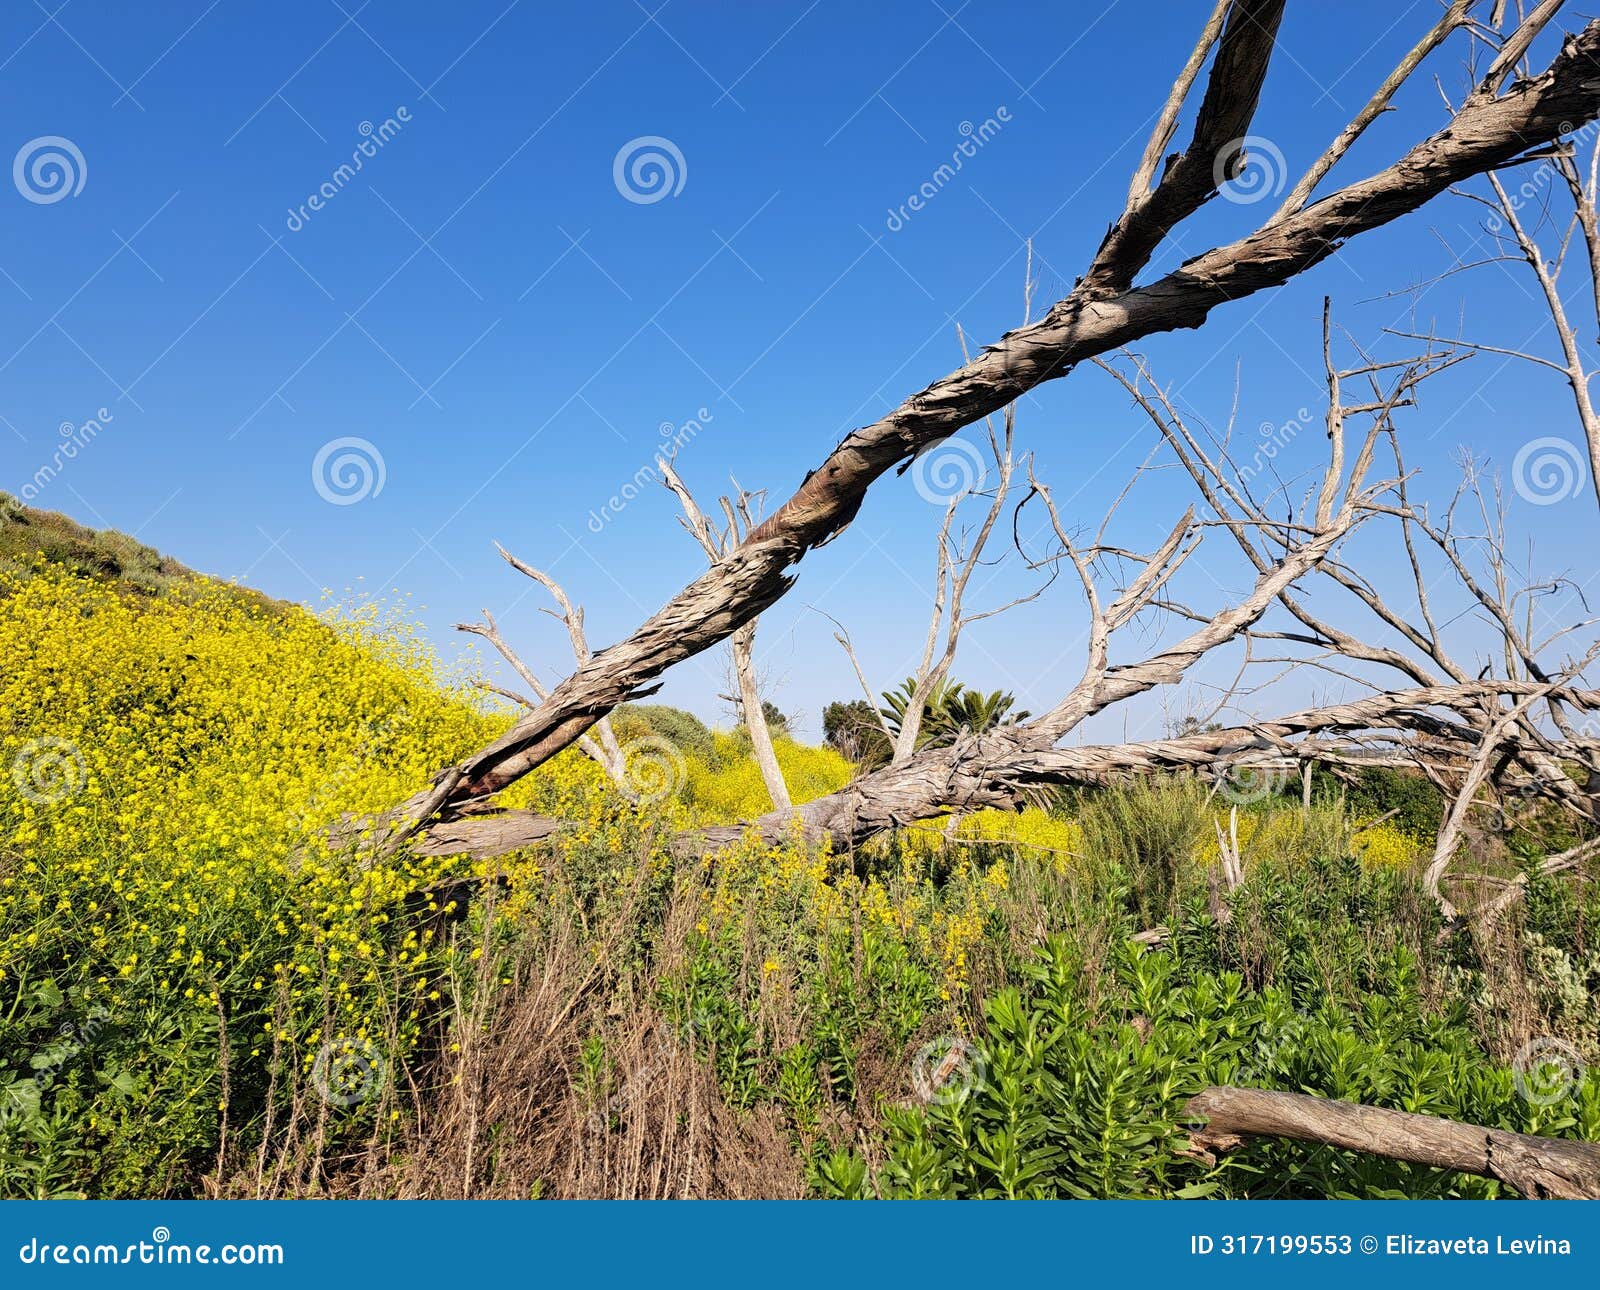 blooming hills, bolsa chica wetlands ecological preserve, orange county, california. yellow flowers and weathered dead branches